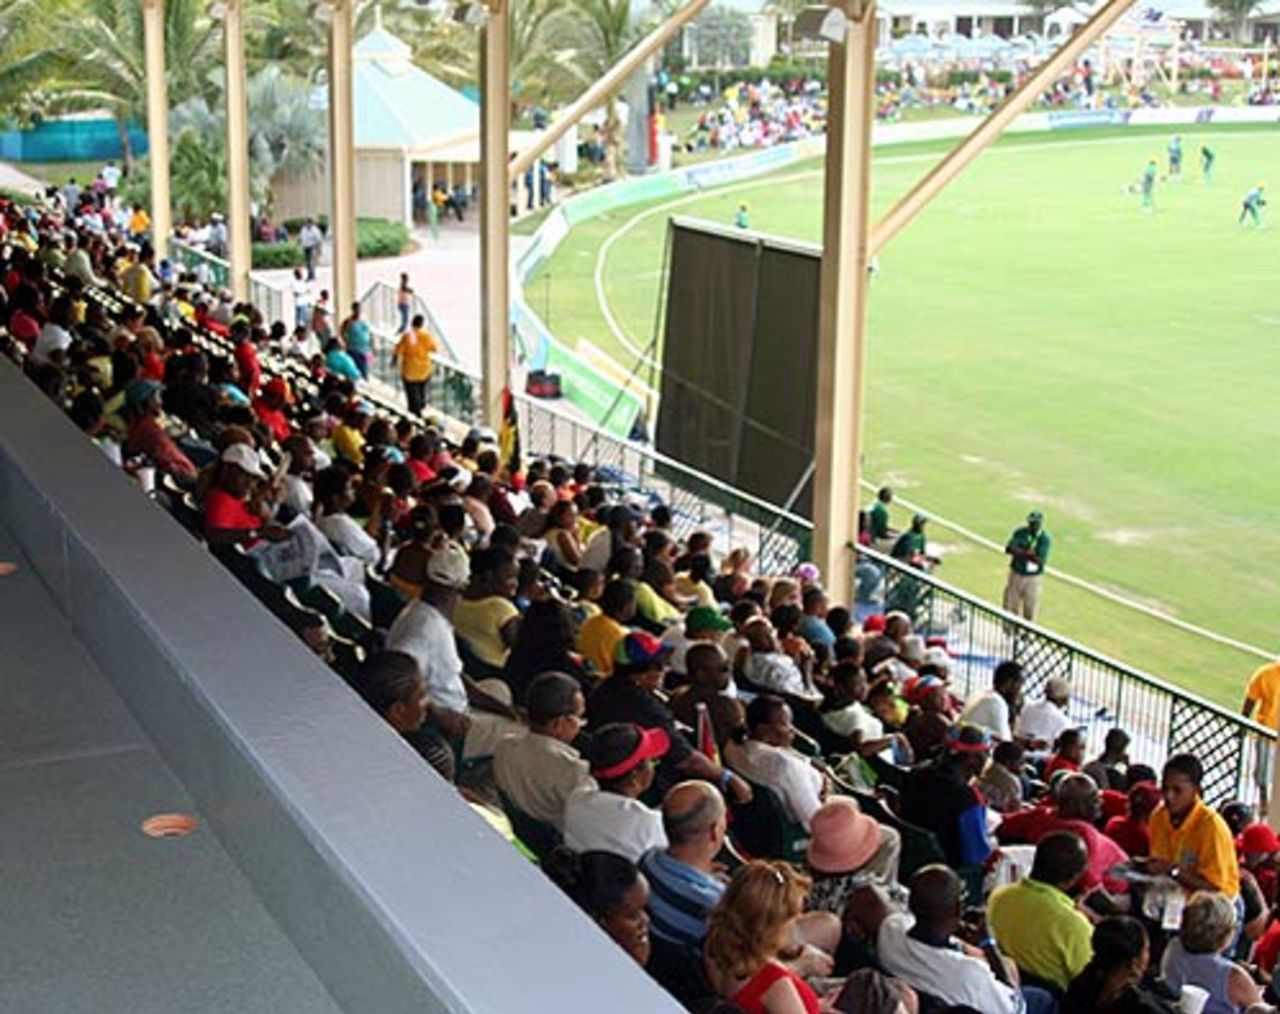 Crowds on the main stand watch the teams warm up, Antigua v St Lucia, Stanford 20/20, St. Johns, July 19, 2006